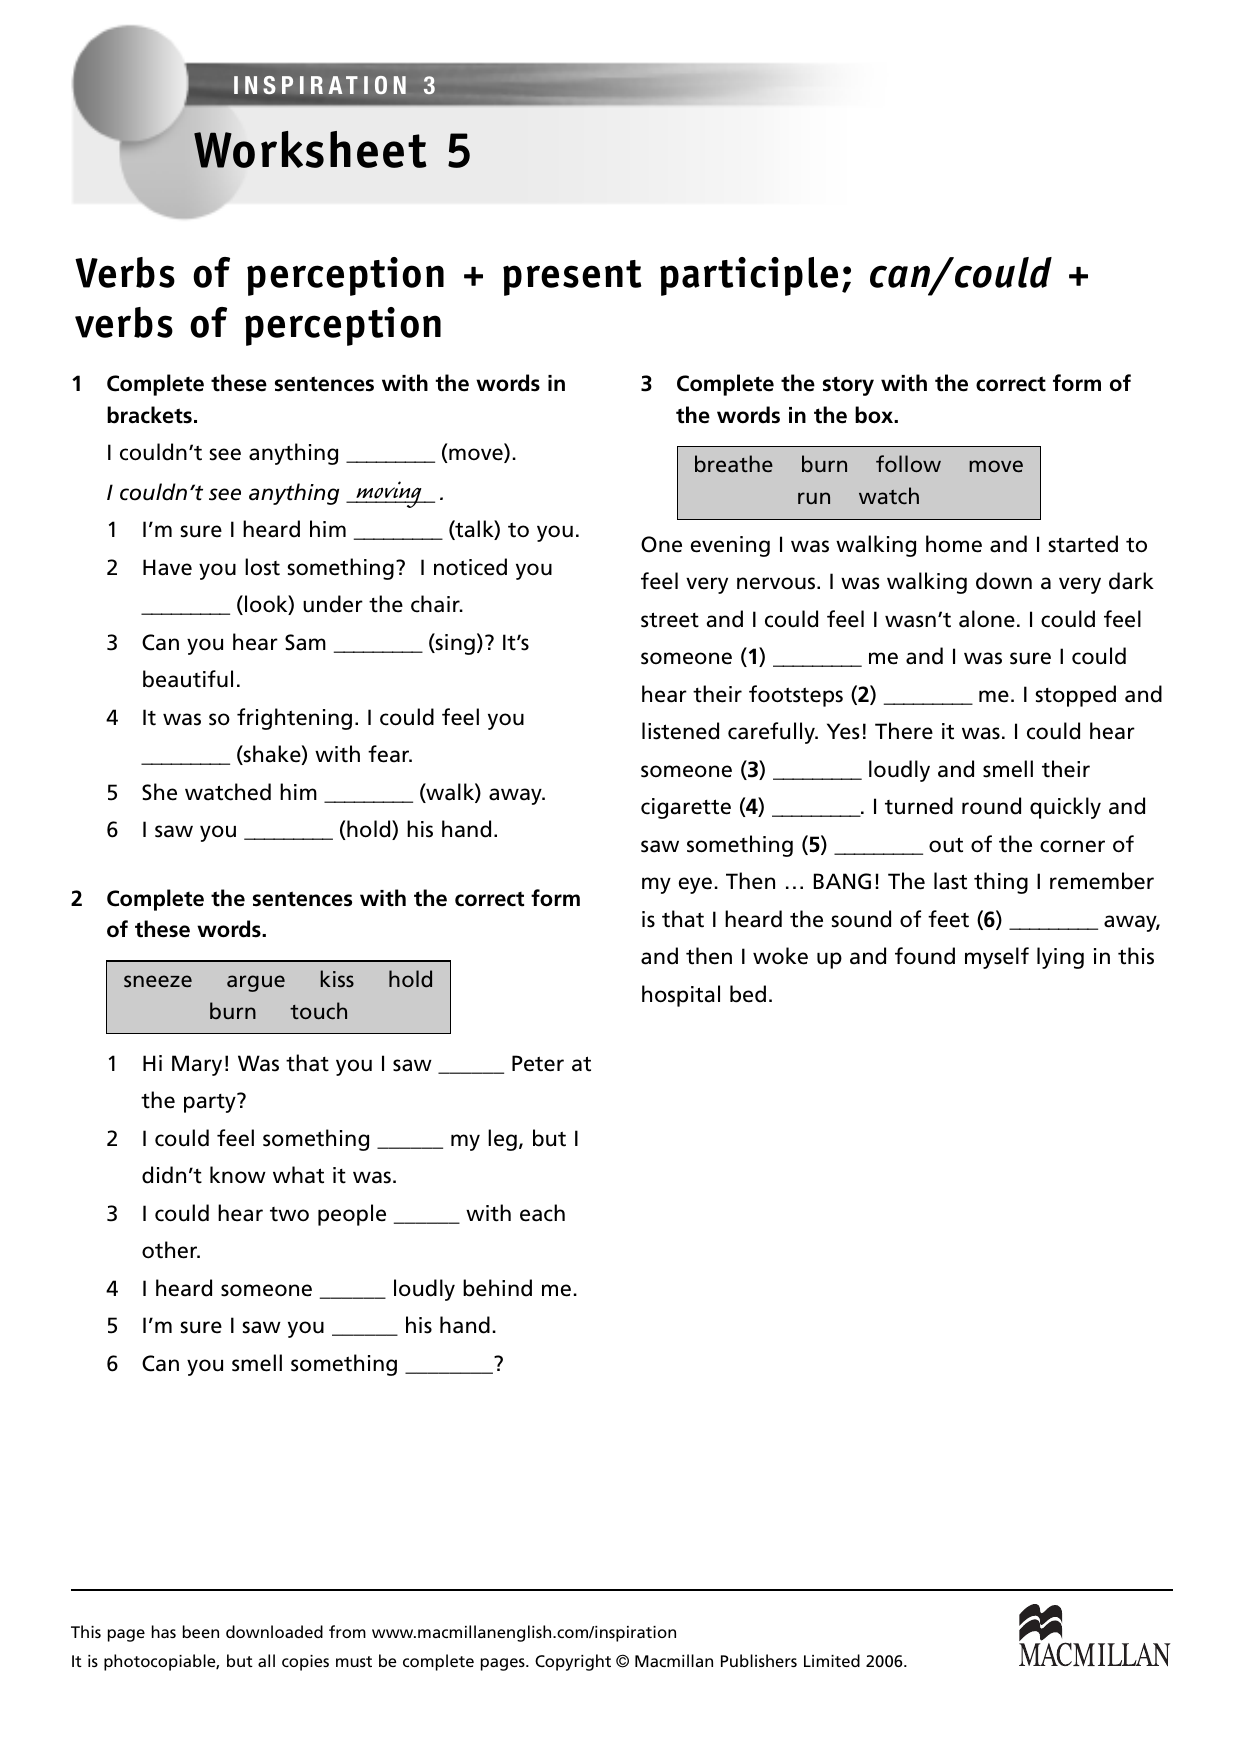 verbs-of-perception-can-could-present-particple